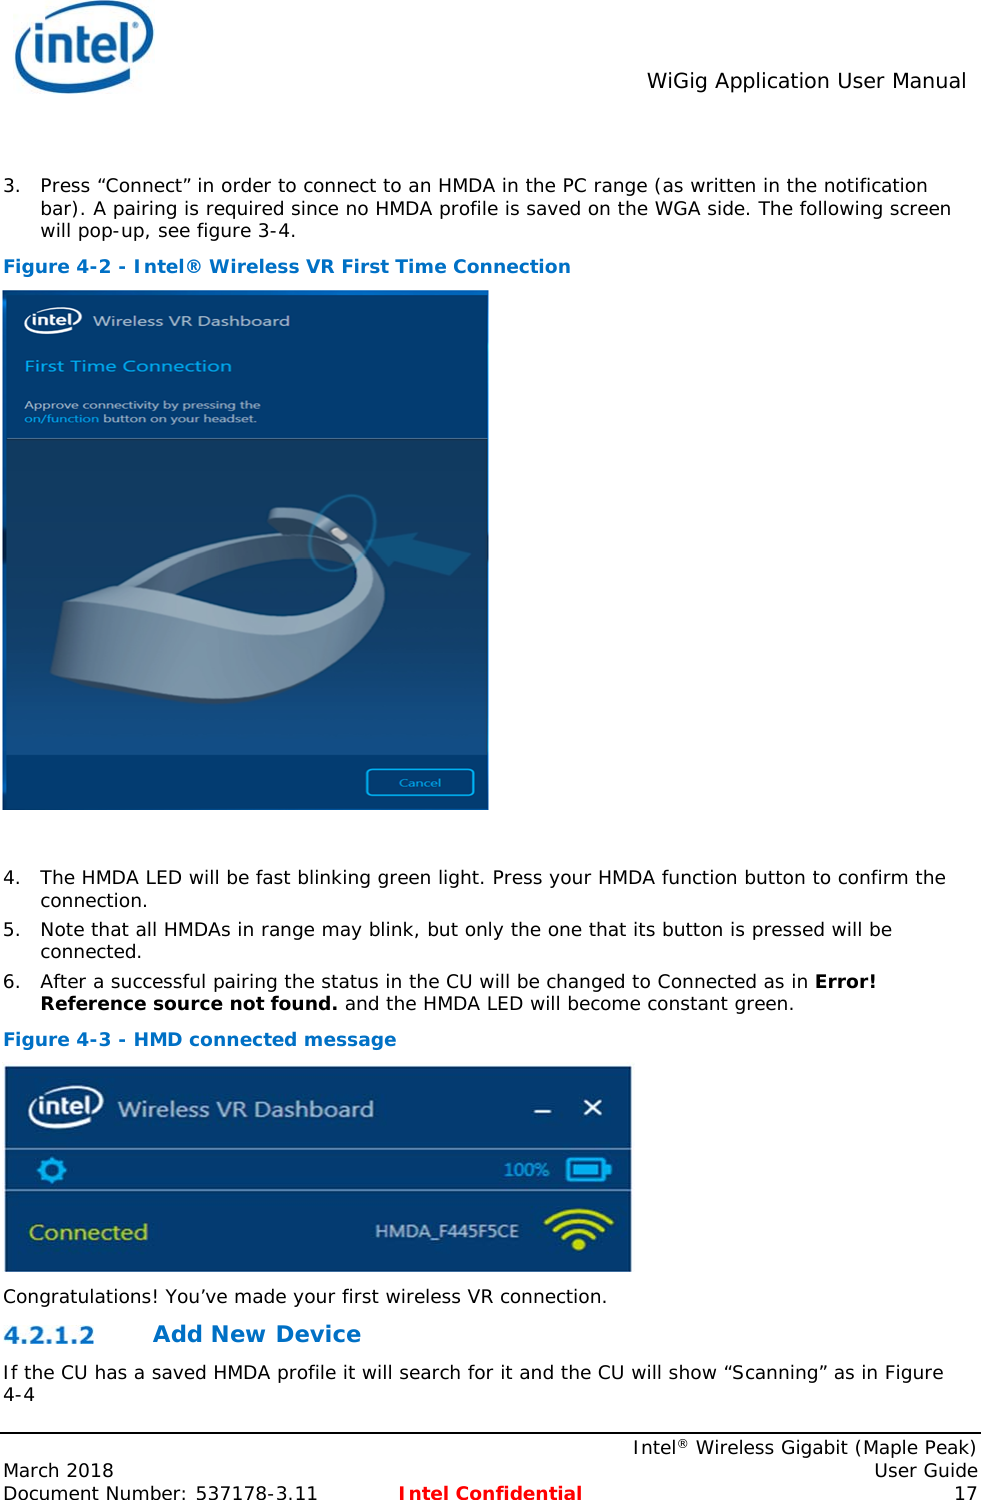  WiGig Application User Manual    Intel® Wireless Gigabit (Maple Peak) March 2018    User Guide Document Number: 537178-3.11  Intel Confidential 17  3. Press “Connect” in order to connect to an HMDA in the PC range (as written in the notification bar). A pairing is required since no HMDA profile is saved on the WGA side. The following screen will pop-up, see figure 3-4.  Figure 4-2 - Intel® Wireless VR First Time Connection   4. The HMDA LED will be fast blinking green light. Press your HMDA function button to confirm the connection.  5. Note that all HMDAs in range may blink, but only the one that its button is pressed will be connected. 6. After a successful pairing the status in the CU will be changed to Connected as in Error! Reference source not found. and the HMDA LED will become constant green. Figure 4-3 - HMD connected message  Congratulations! You’ve made your first wireless VR connection.  Add New Device  If the CU has a saved HMDA profile it will search for it and the CU will show “Scanning” as in Figure 4-4 